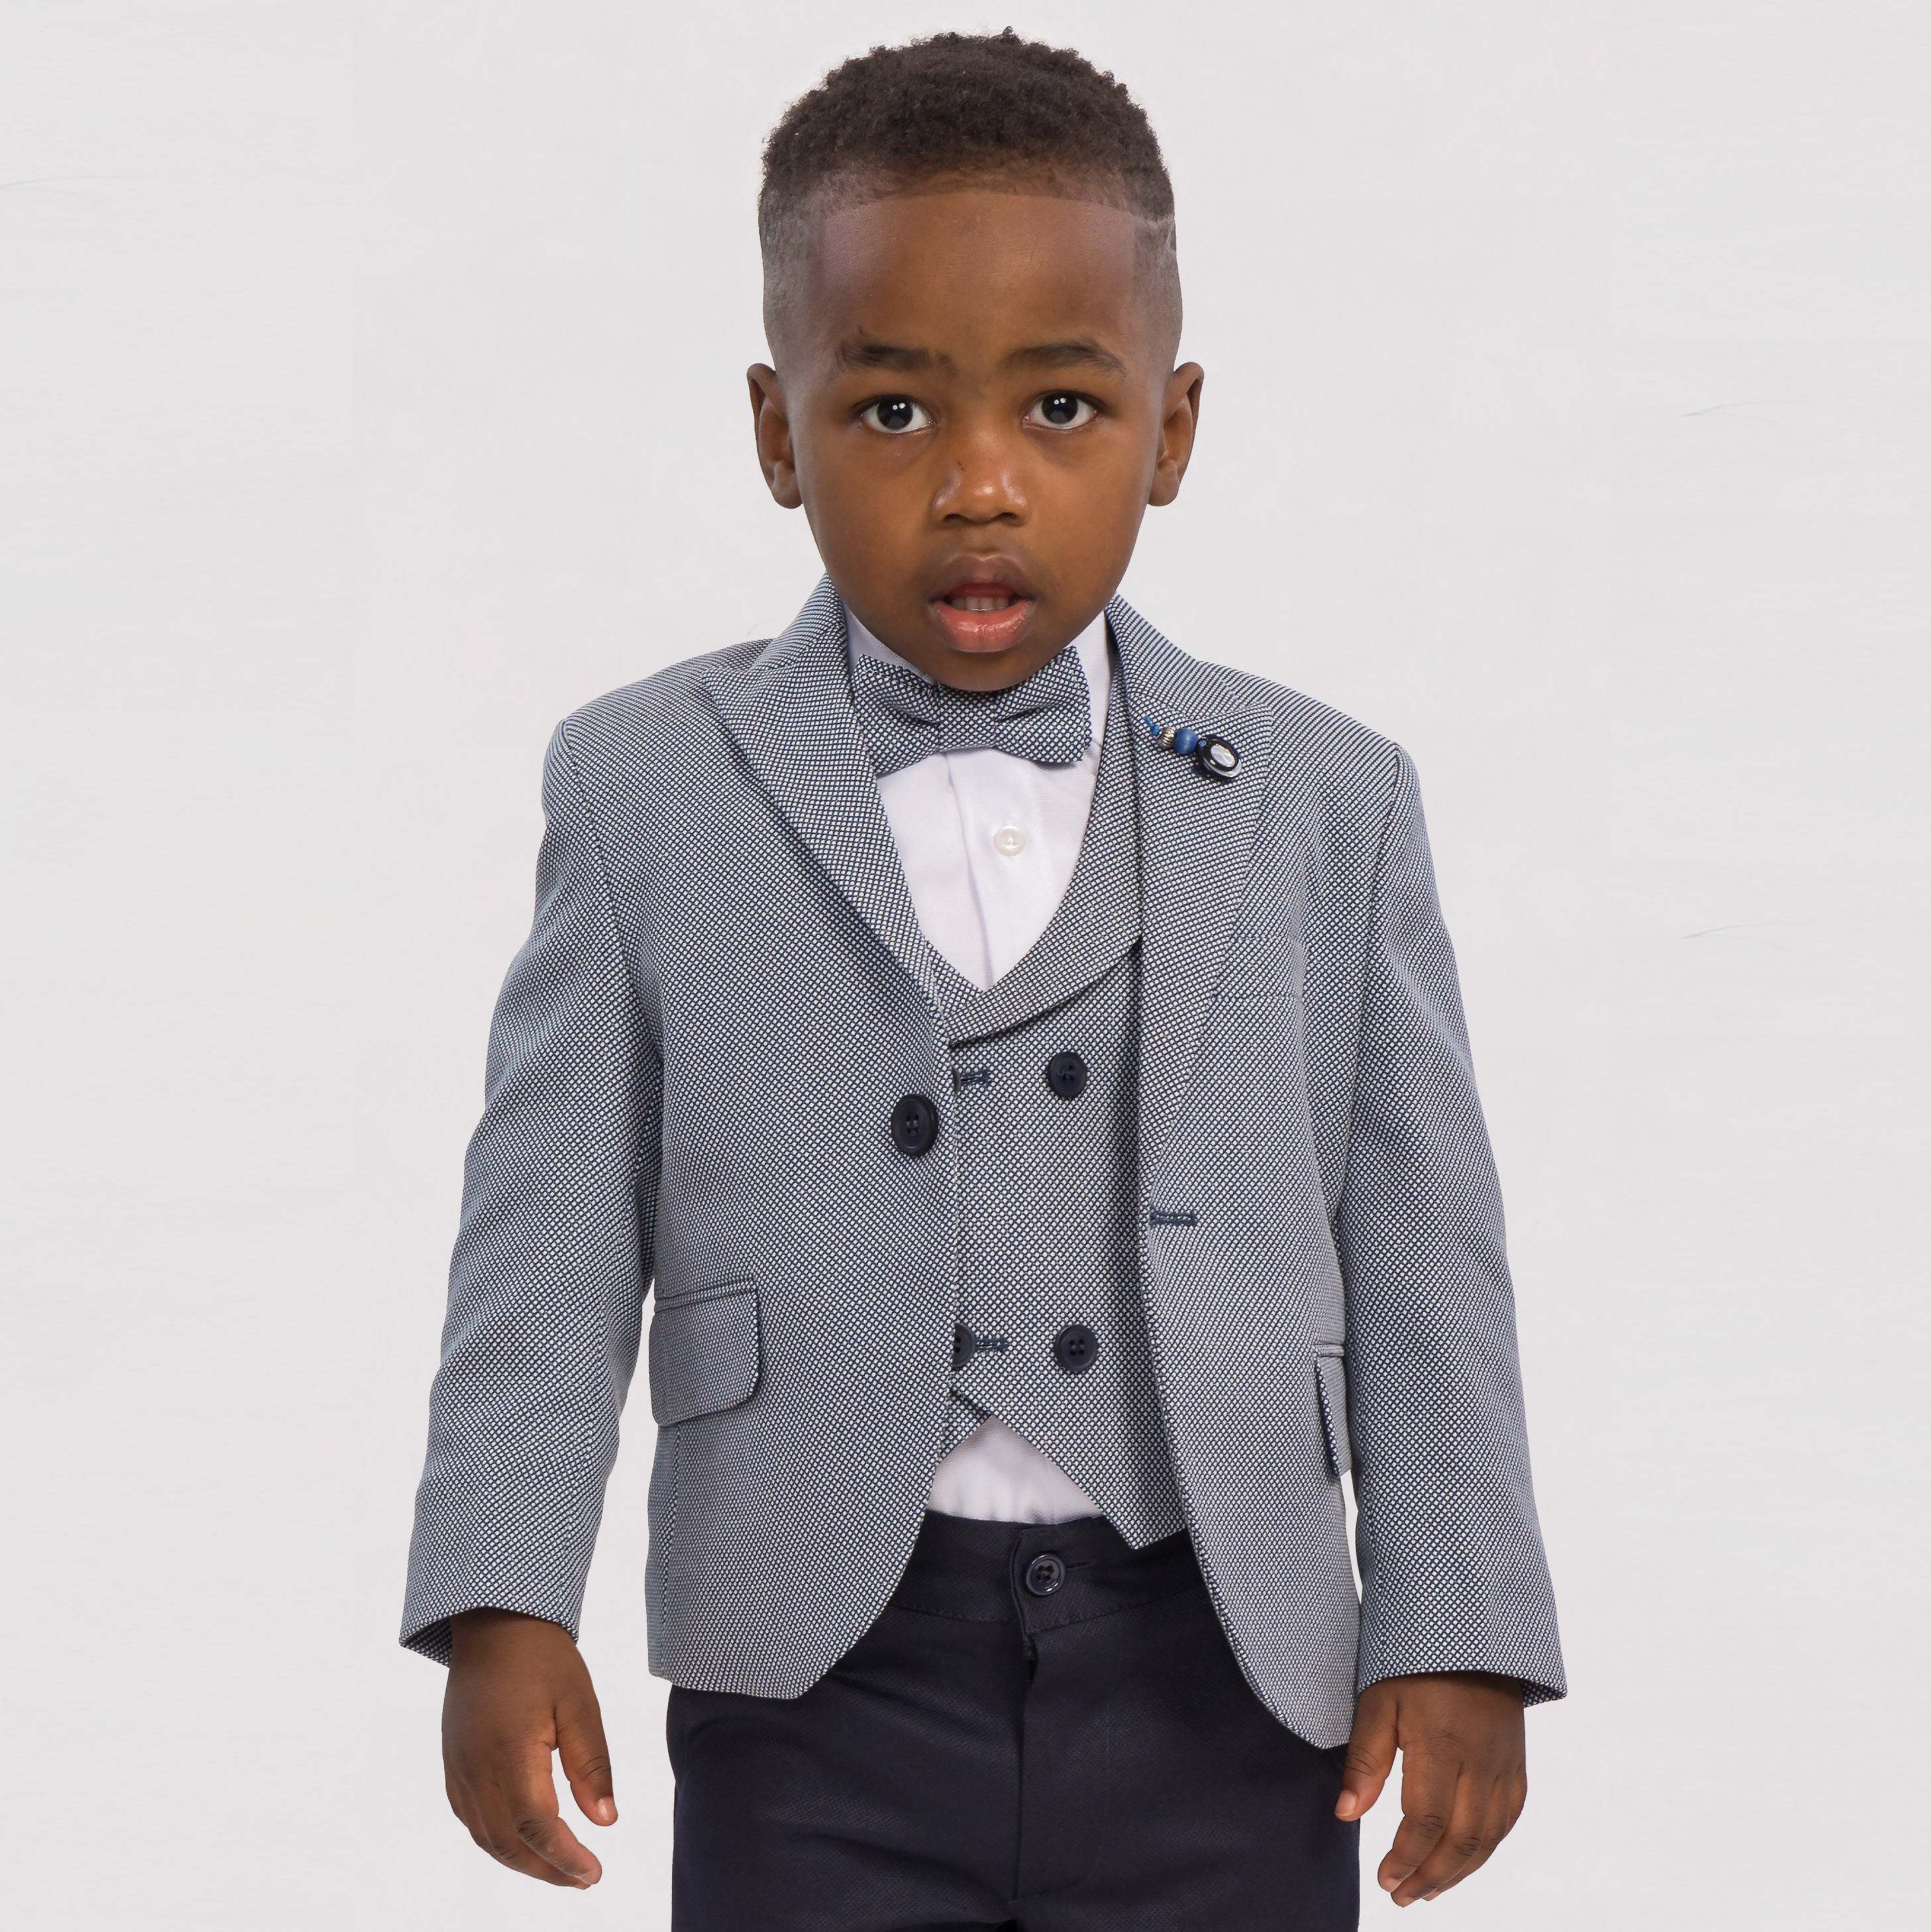 Too Cool Formal Boys Suit